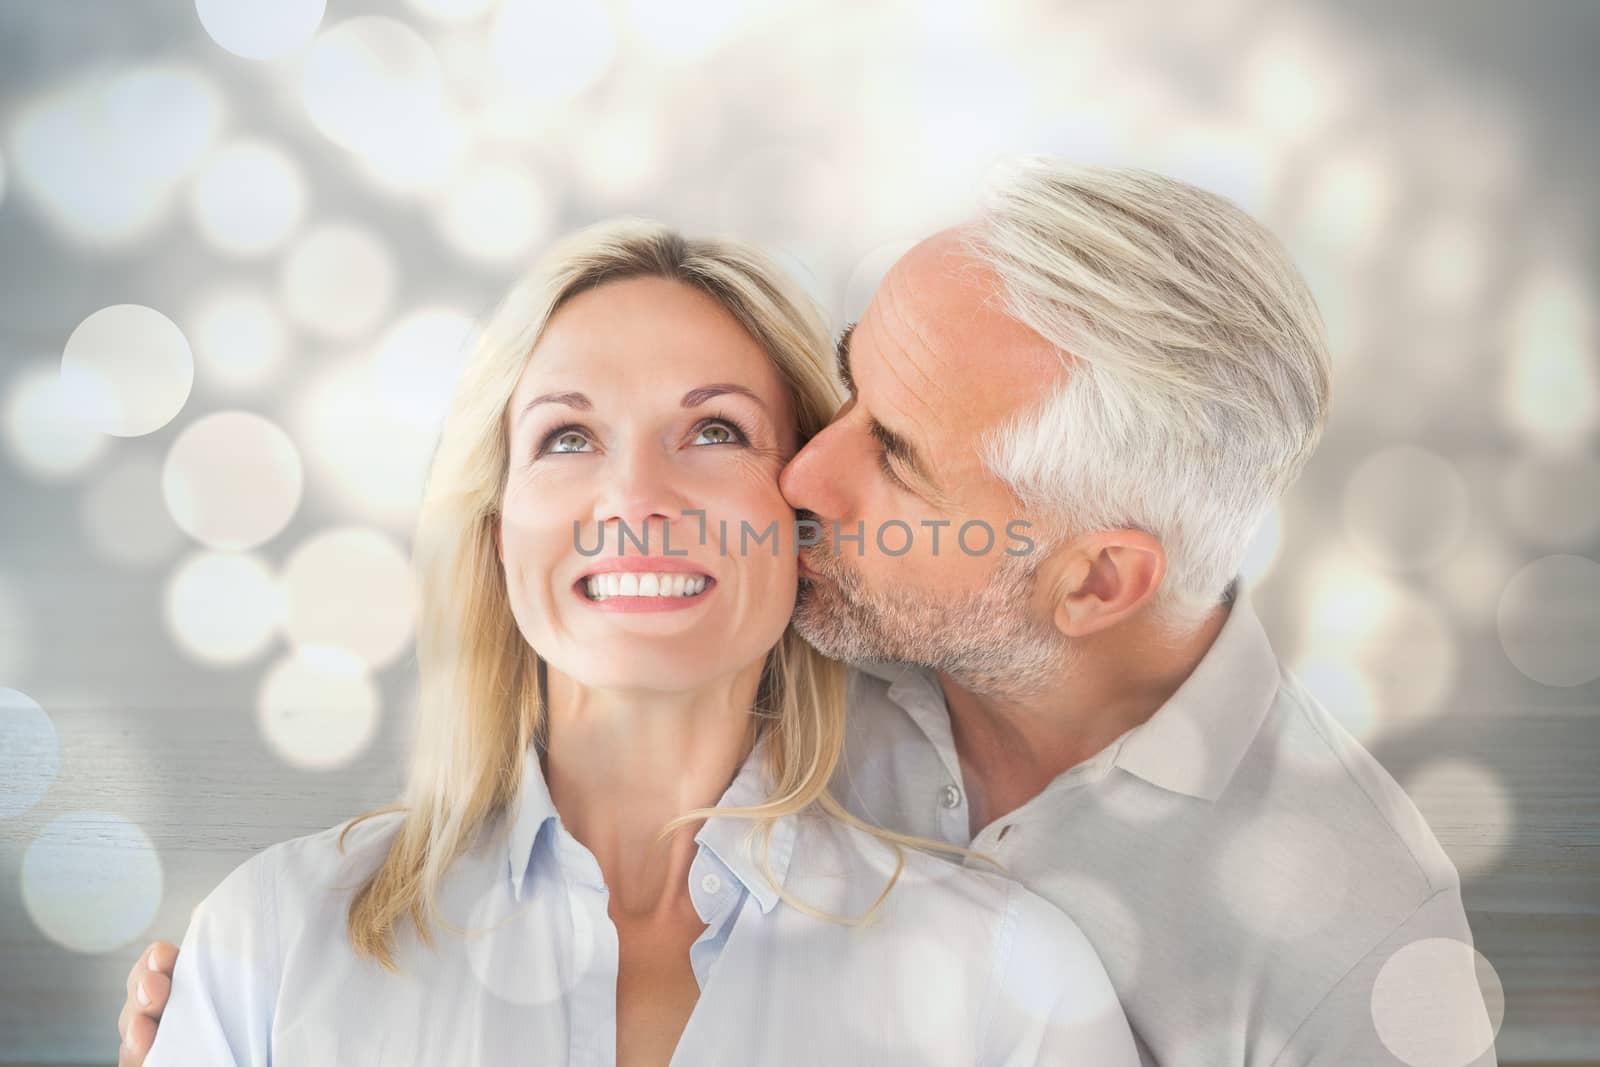 Affectionate man kissing his wife on the cheek  against light circles on bright background